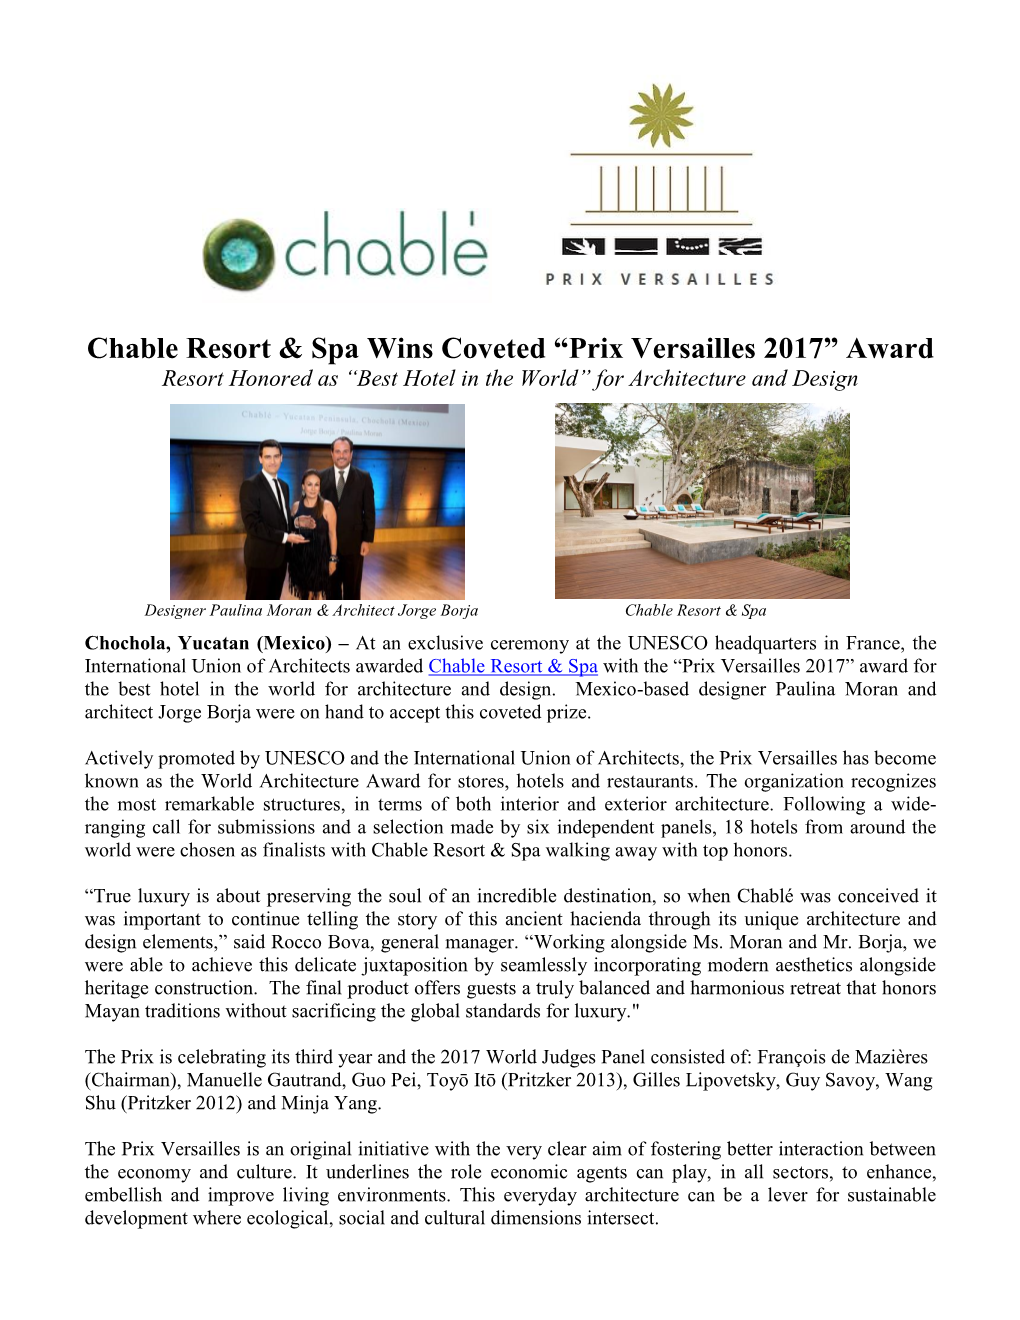 Chable Resort & Spa Wins Coveted “Prix Versailles 2017” Award